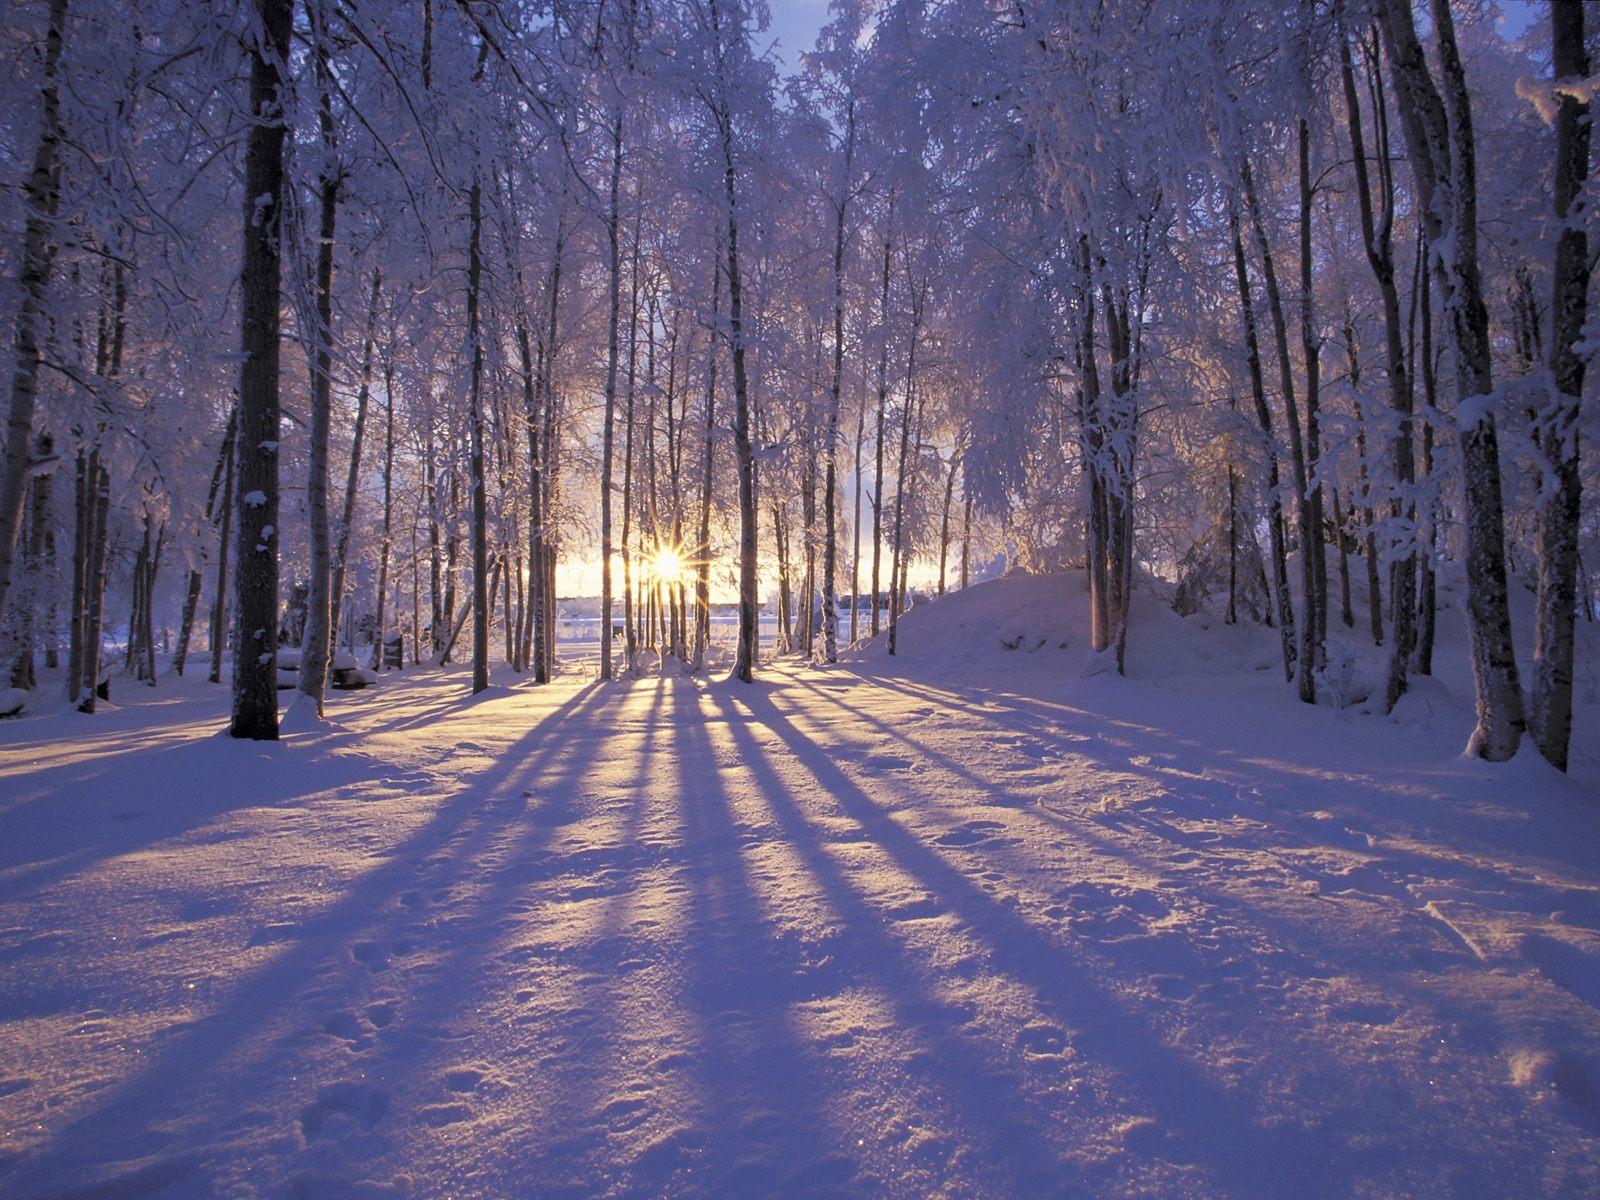 Free Winter Backgrounds